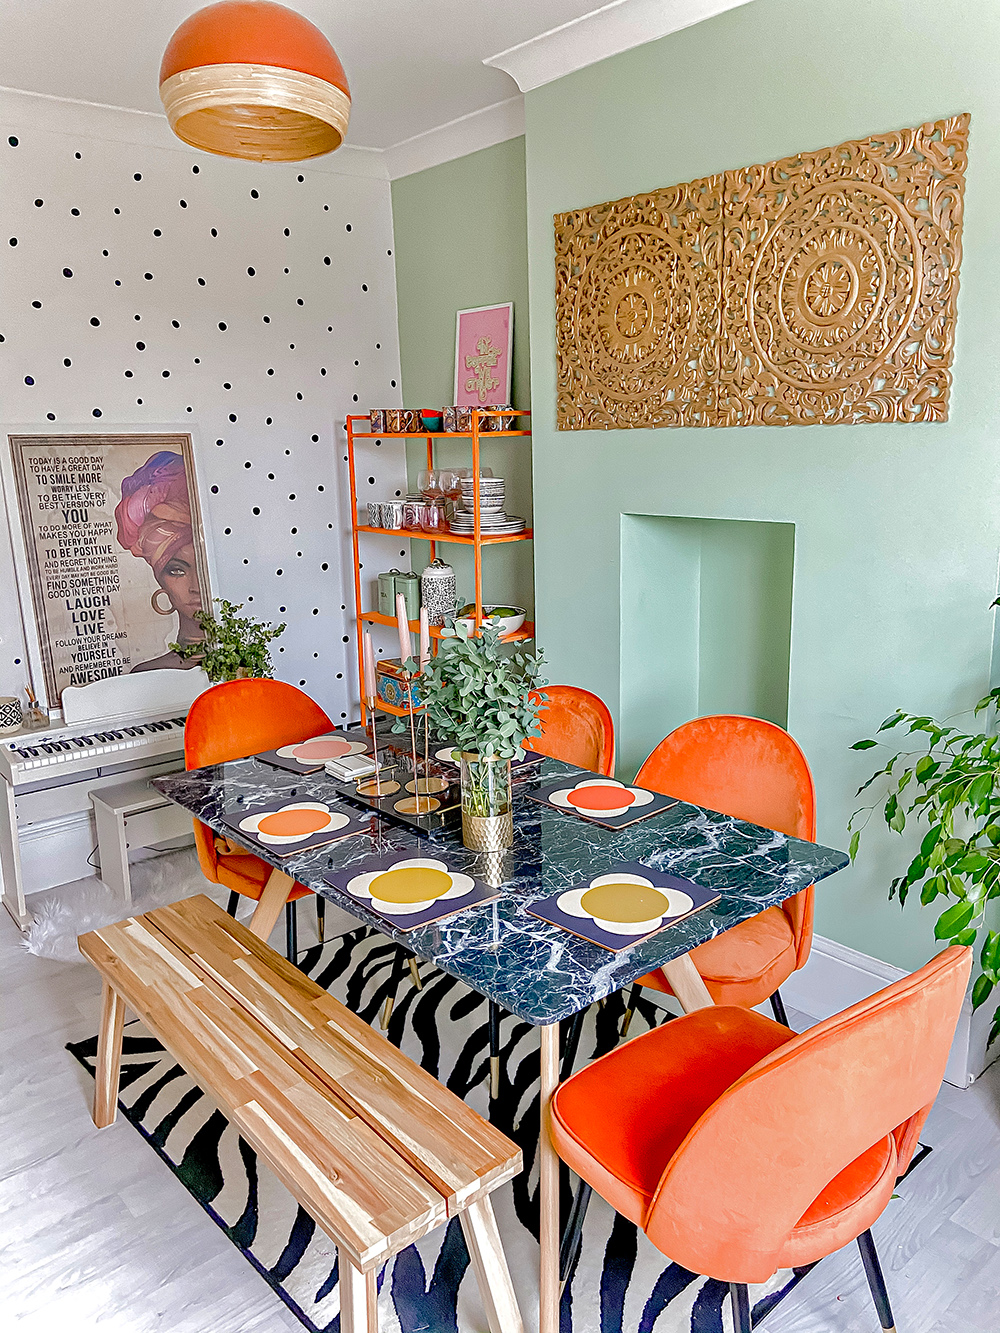 Stunning house tour of this colourful, bohemian rental home, with clashing patterns and lots of lush house plants.